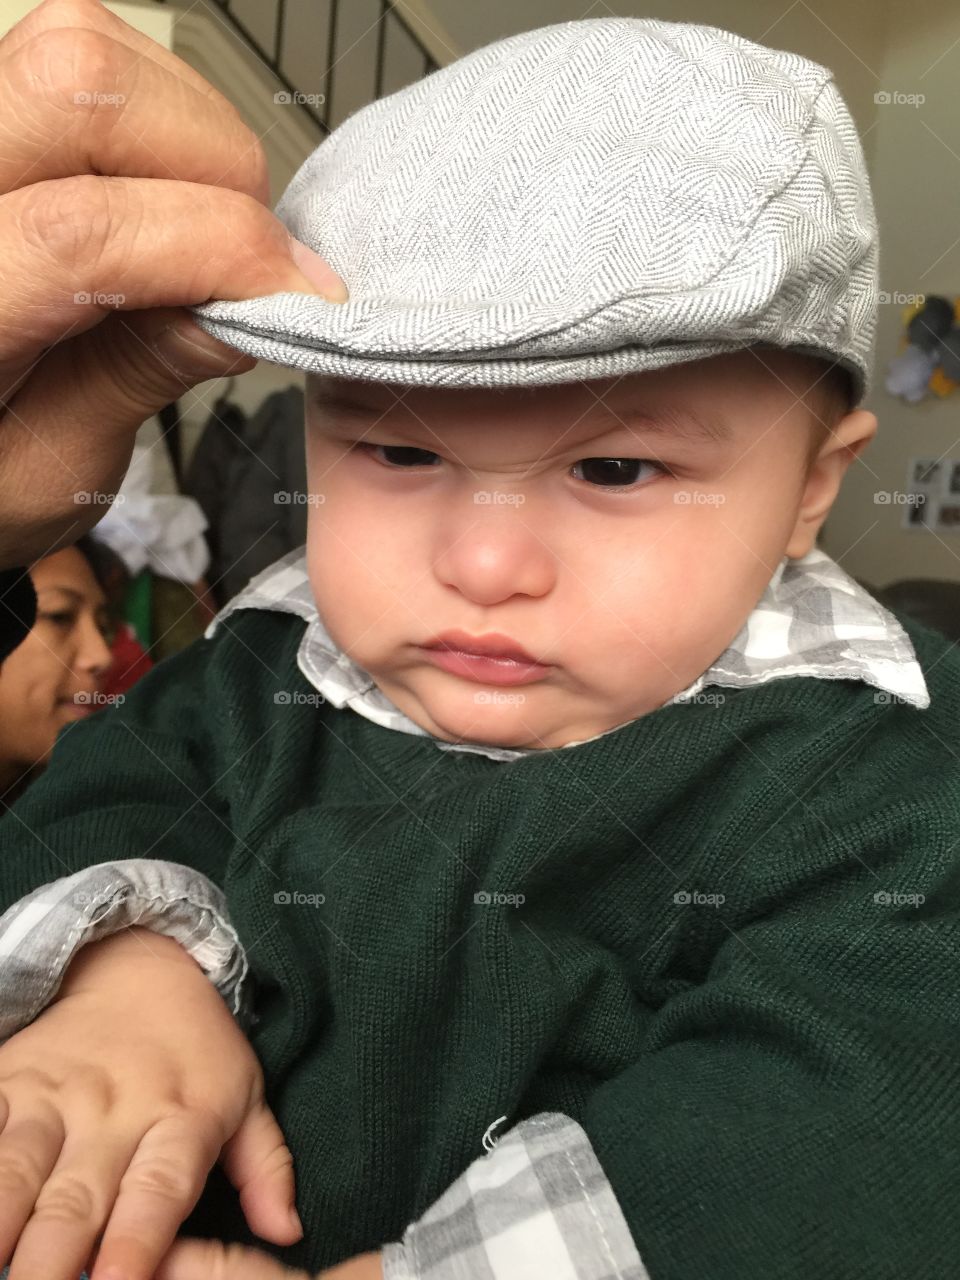 That angry little guy and his hat....